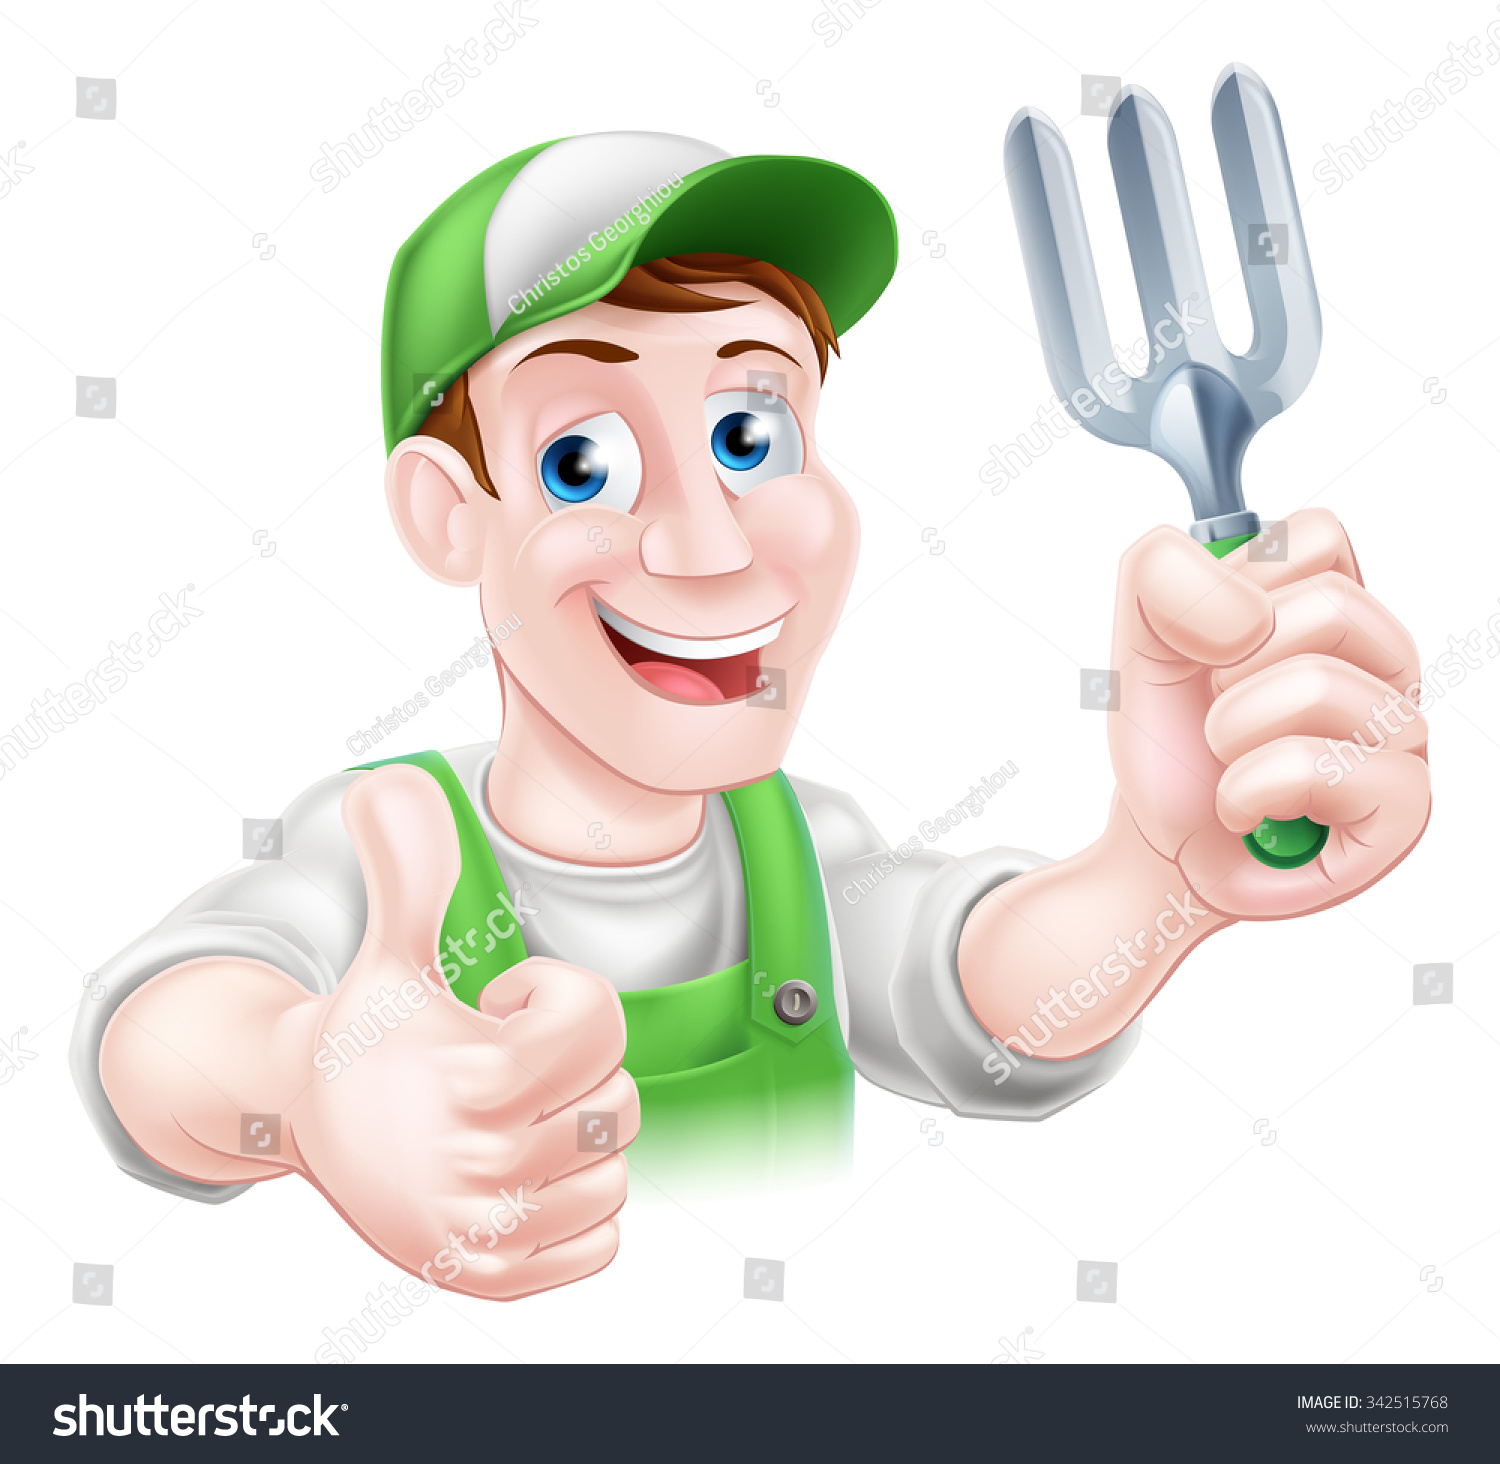 A Cartoon Gardener Character In A Cap And Green Dungarees Holding A